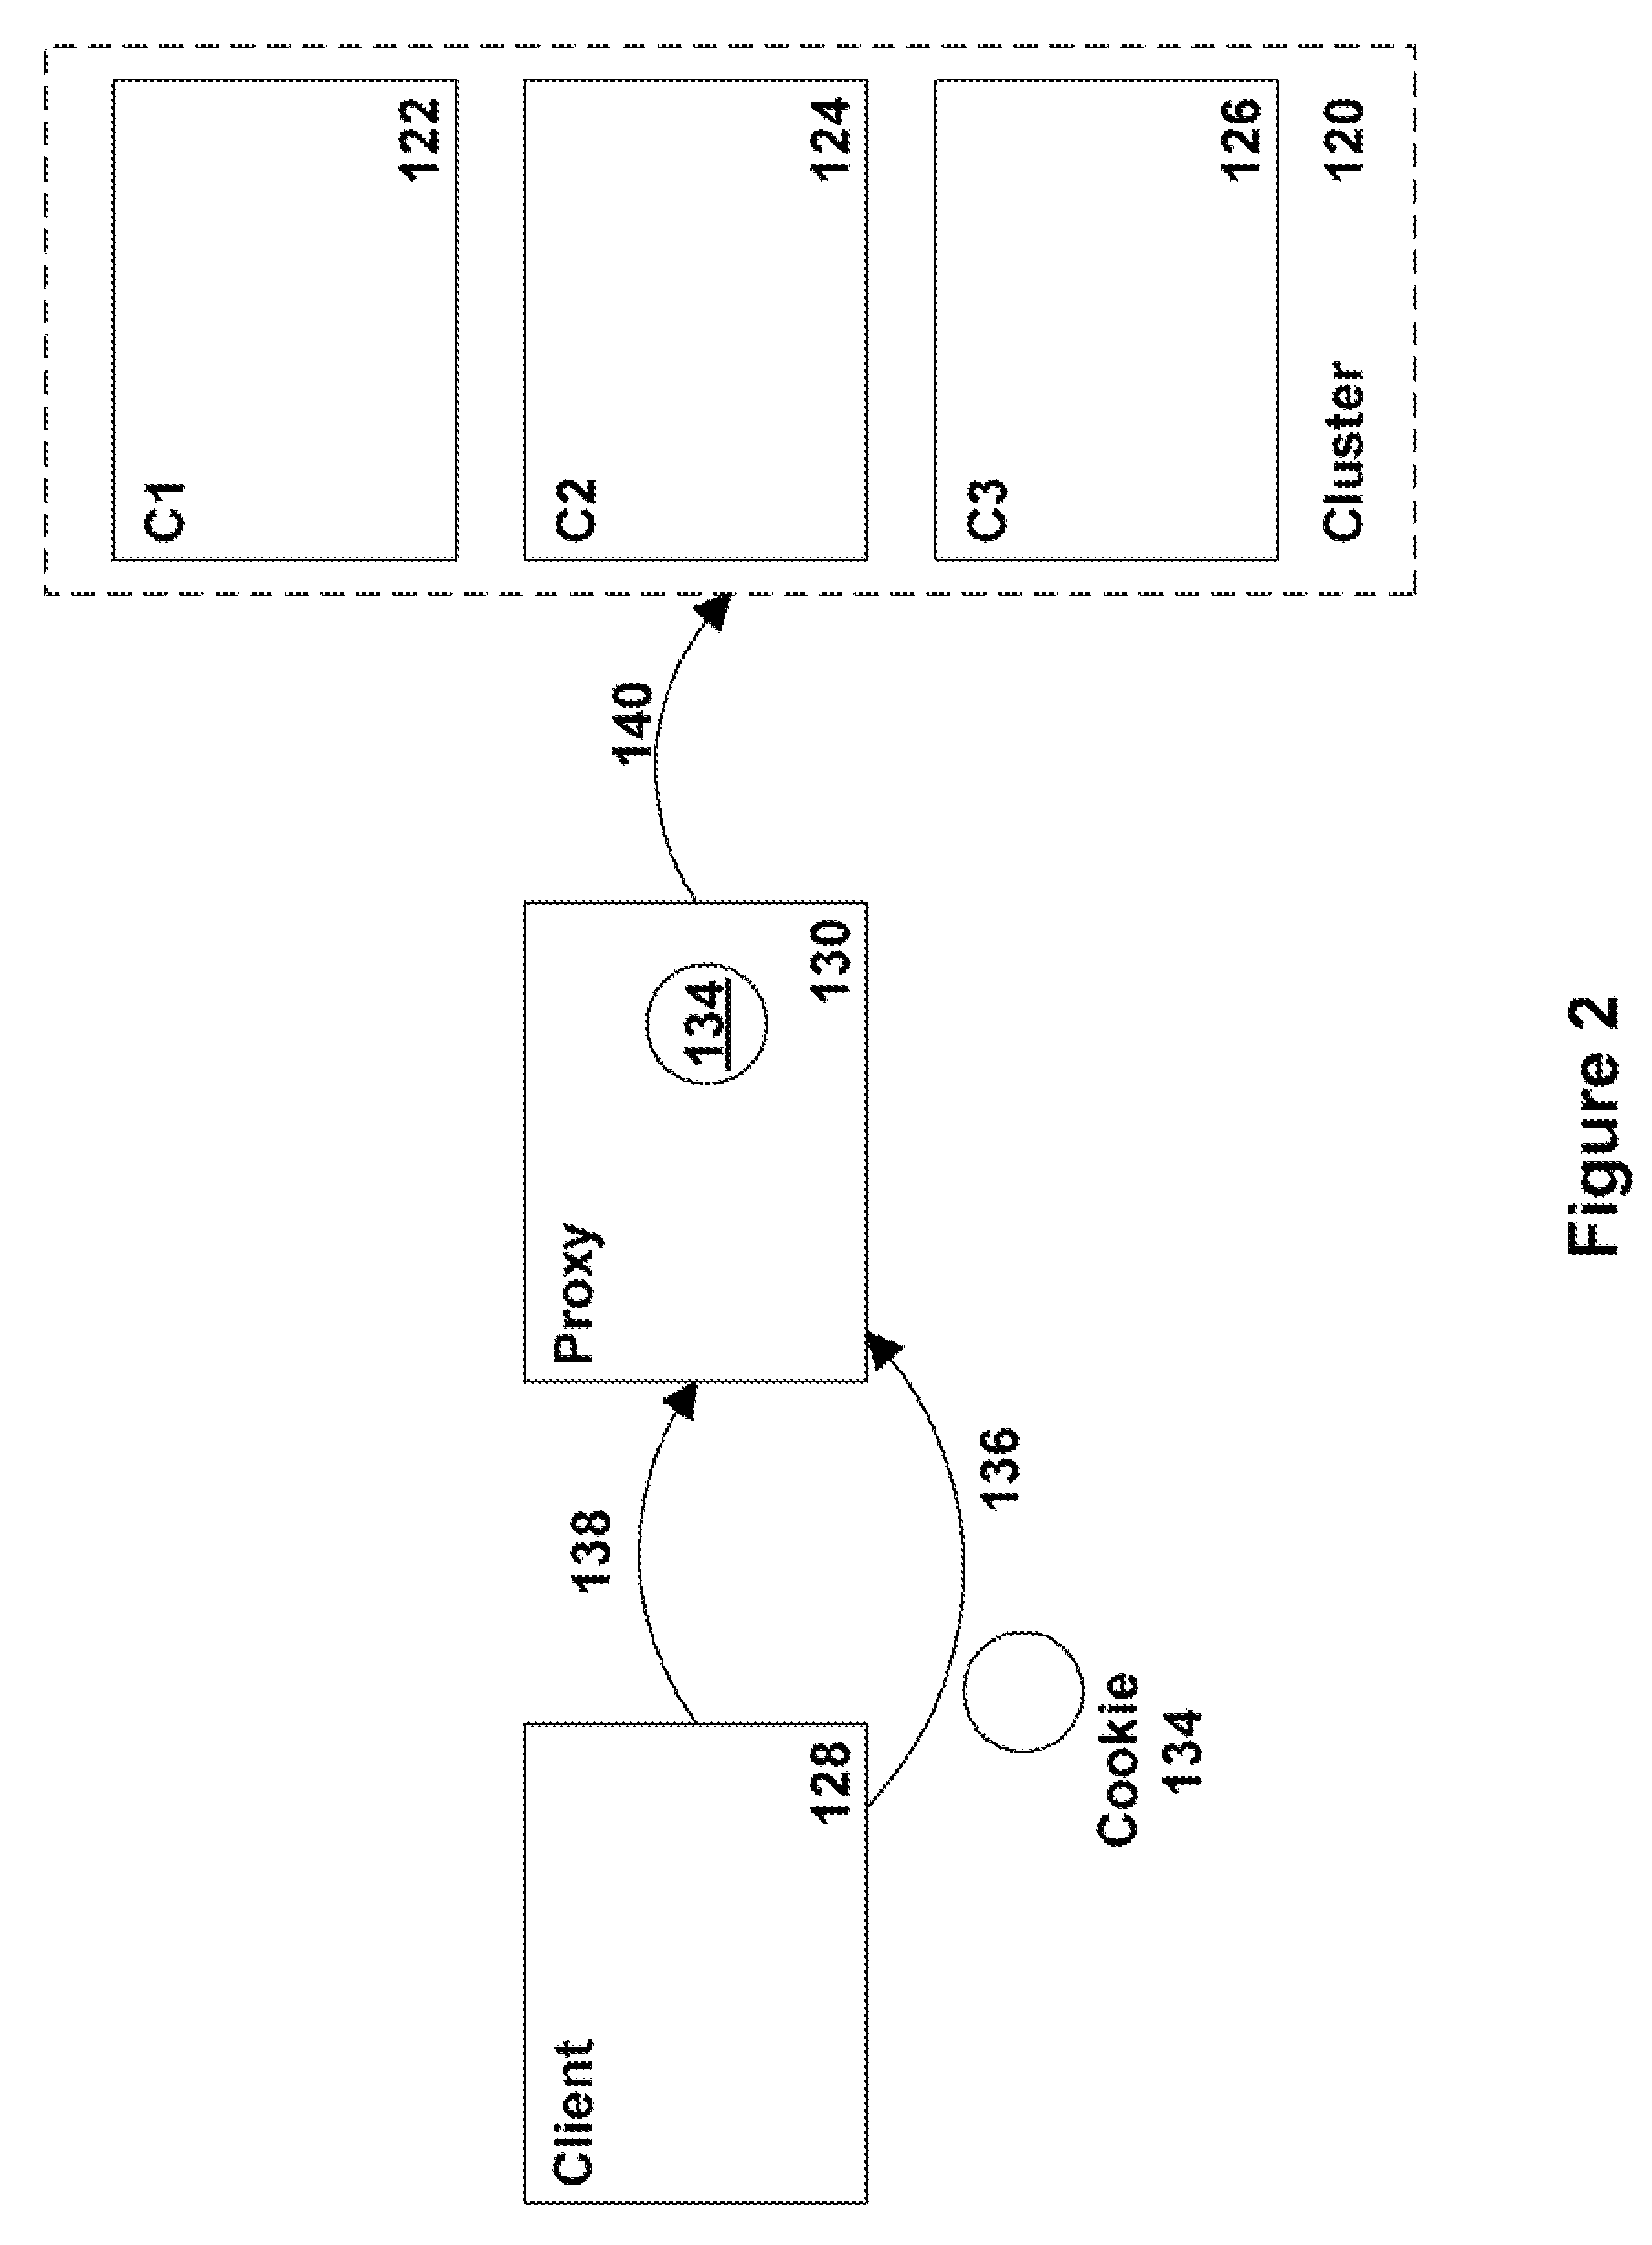 System and method for clustered tunneling of requests in application servers and transaction-based systems